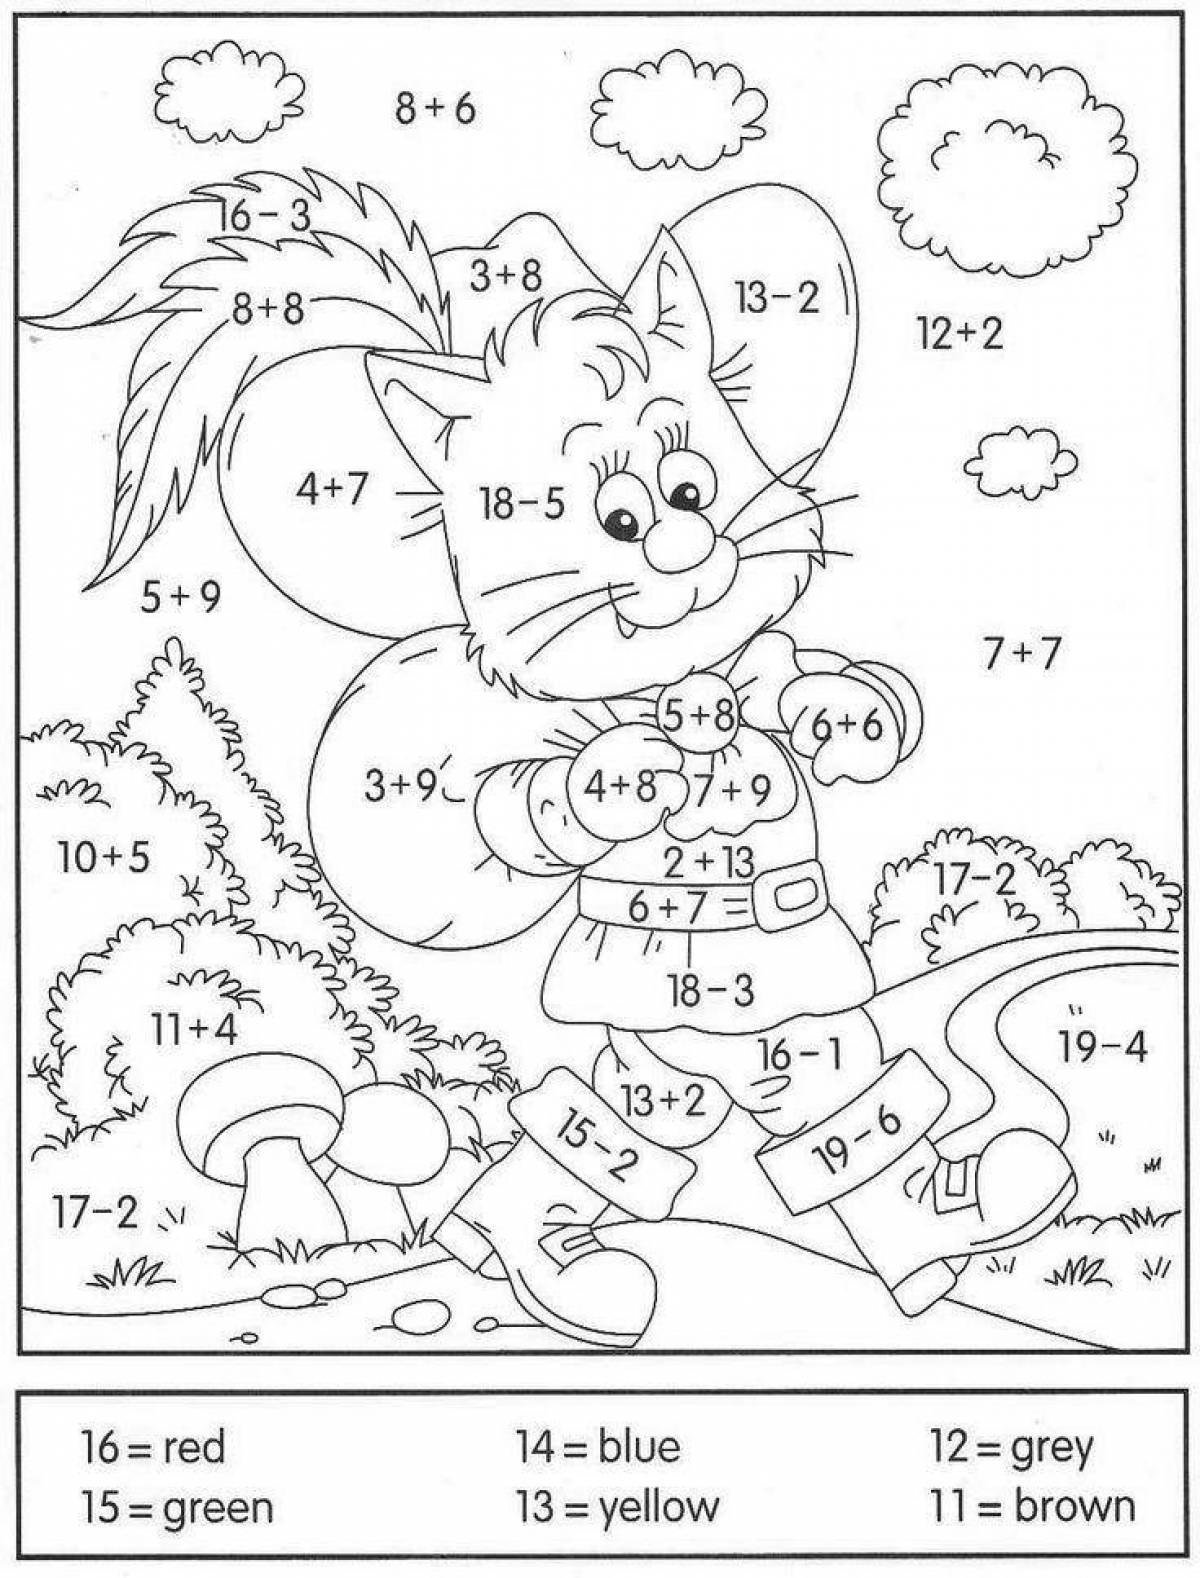 Coloring for up to 10 coloring pages